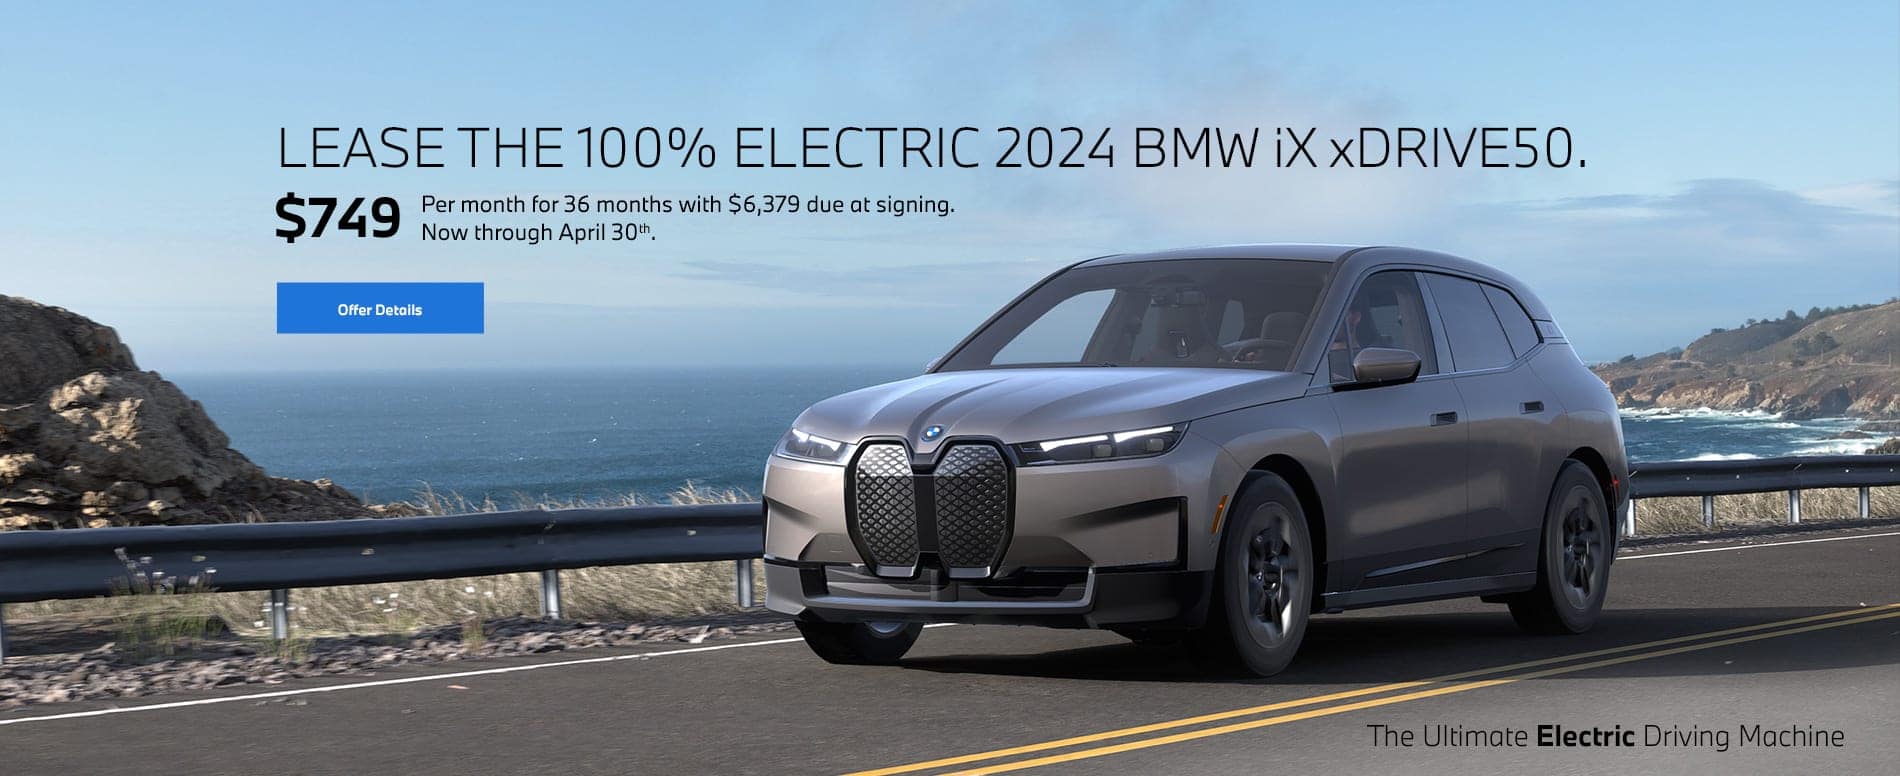 2024 iX xDrive50 lease starting at $749 per month for 36 months